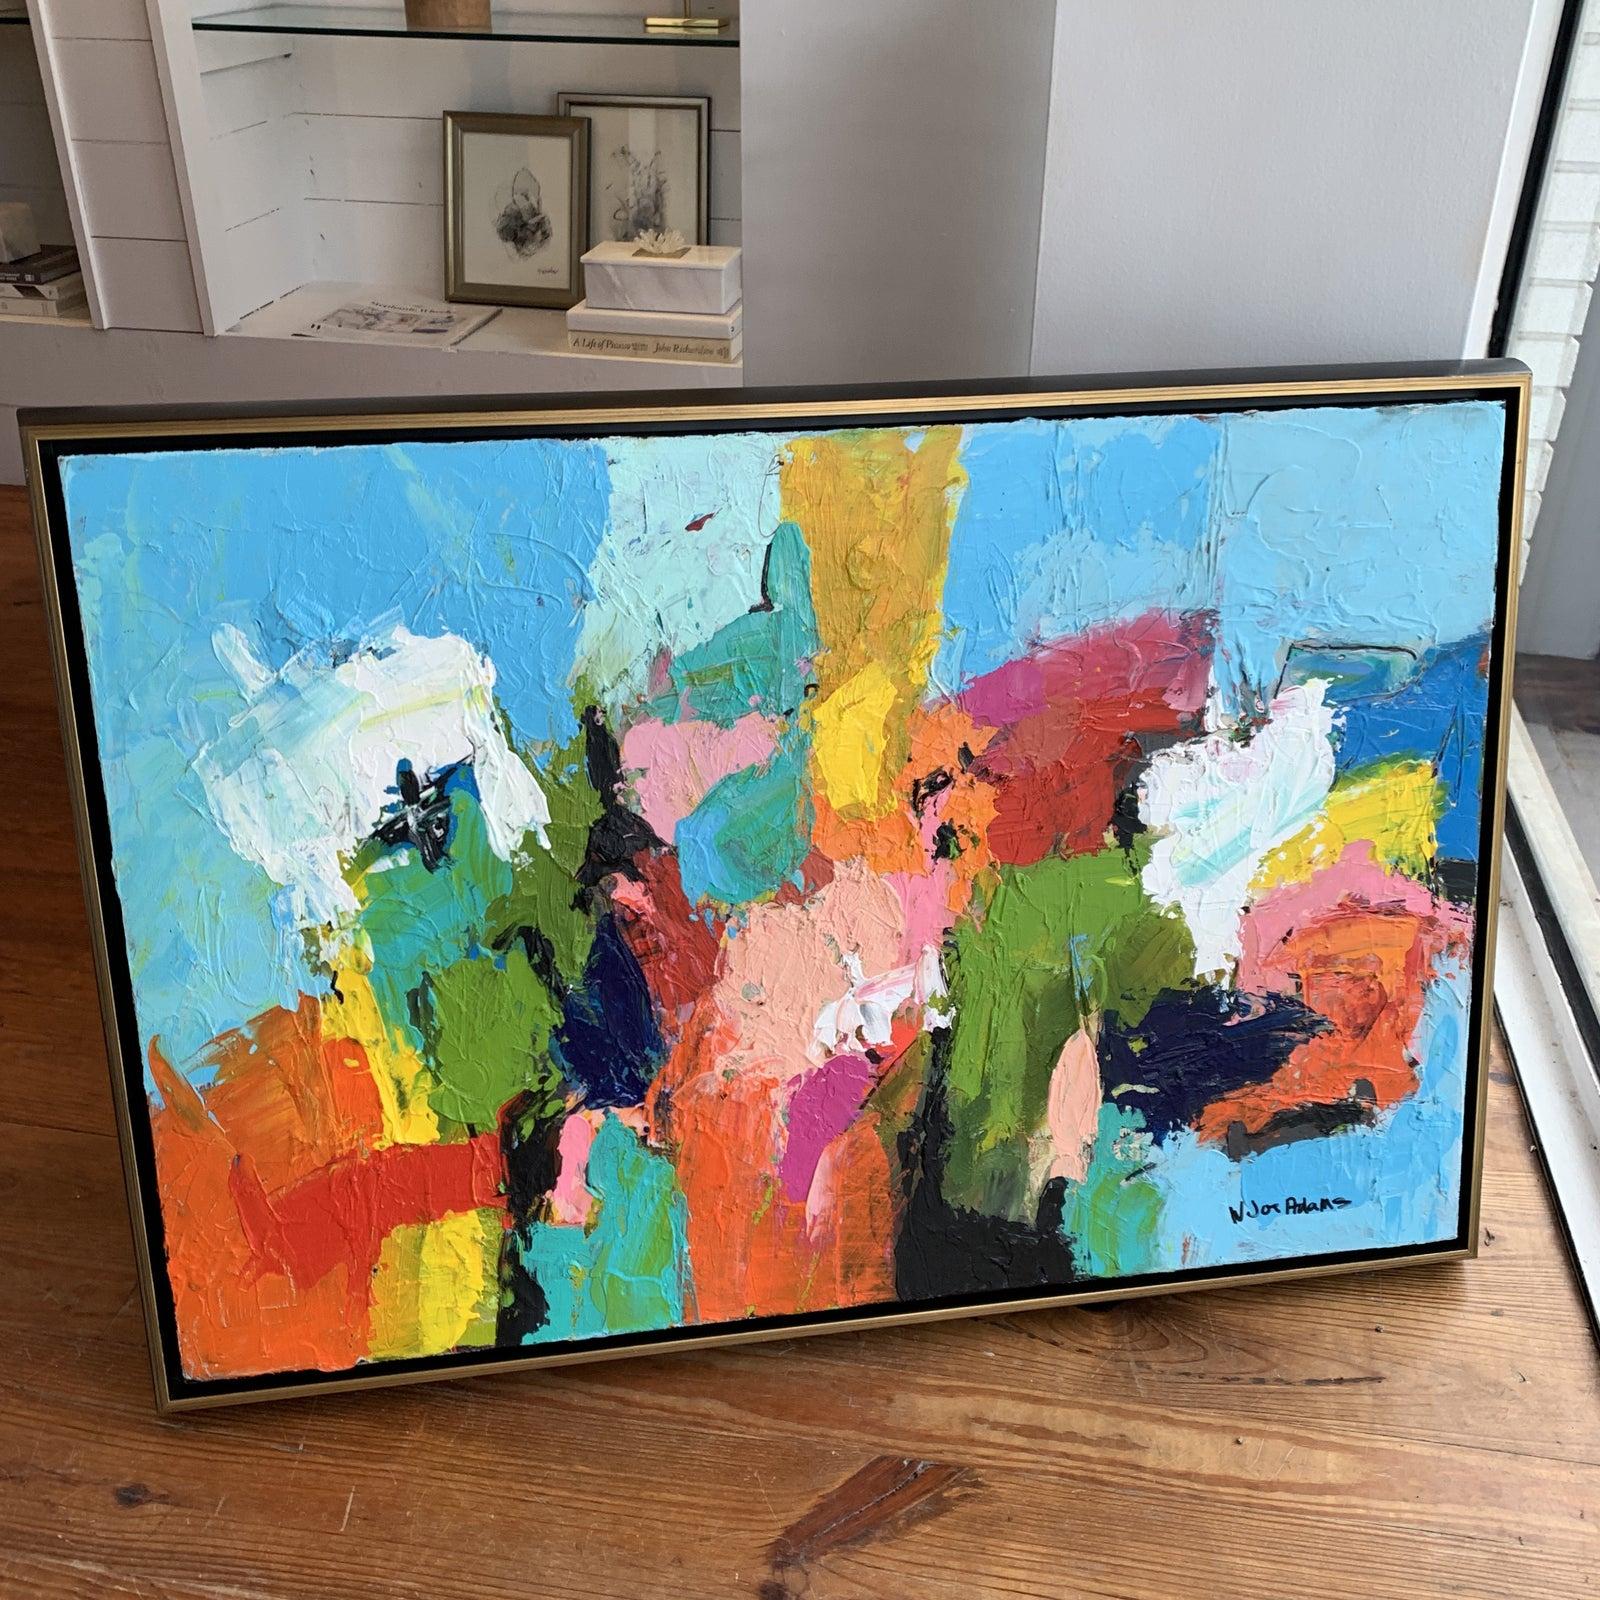 Be prepared for very bright colors!! 
This painting will surely brighten you life and interior space by Joe Adams 
Framed in black and gold floater frame , signed on the front right
Blues , corals , reds and white with very thick brush strokes. More